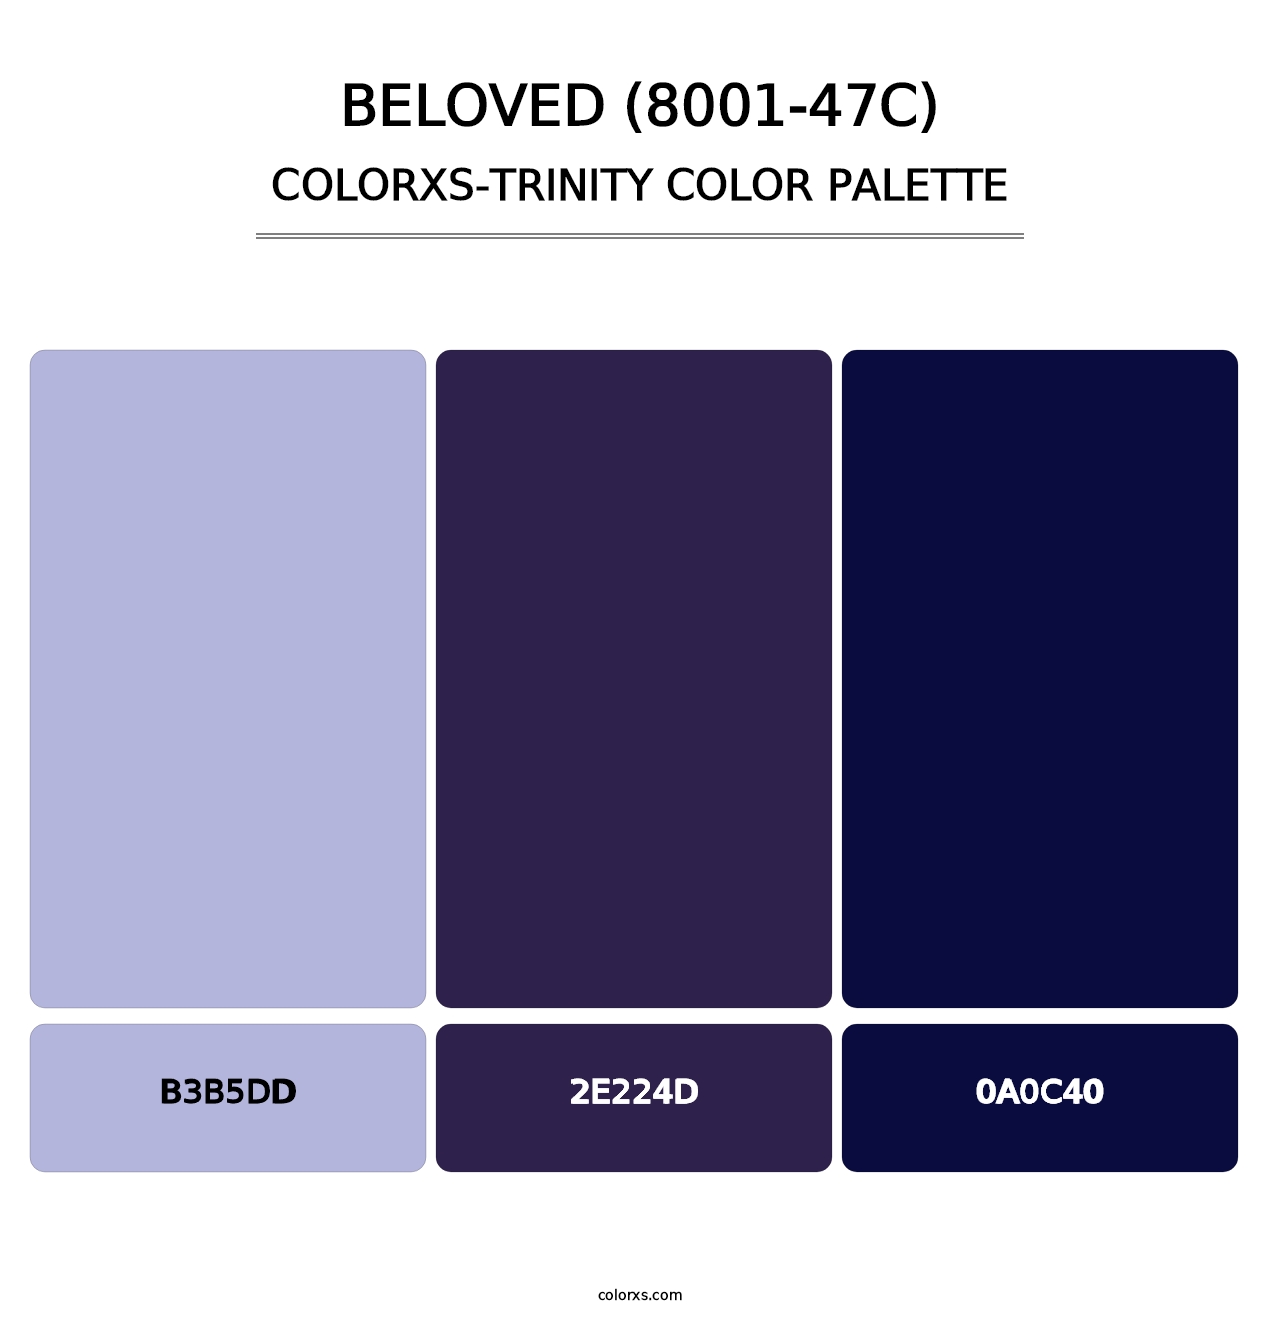 Beloved (8001-47C) - Colorxs Trinity Palette